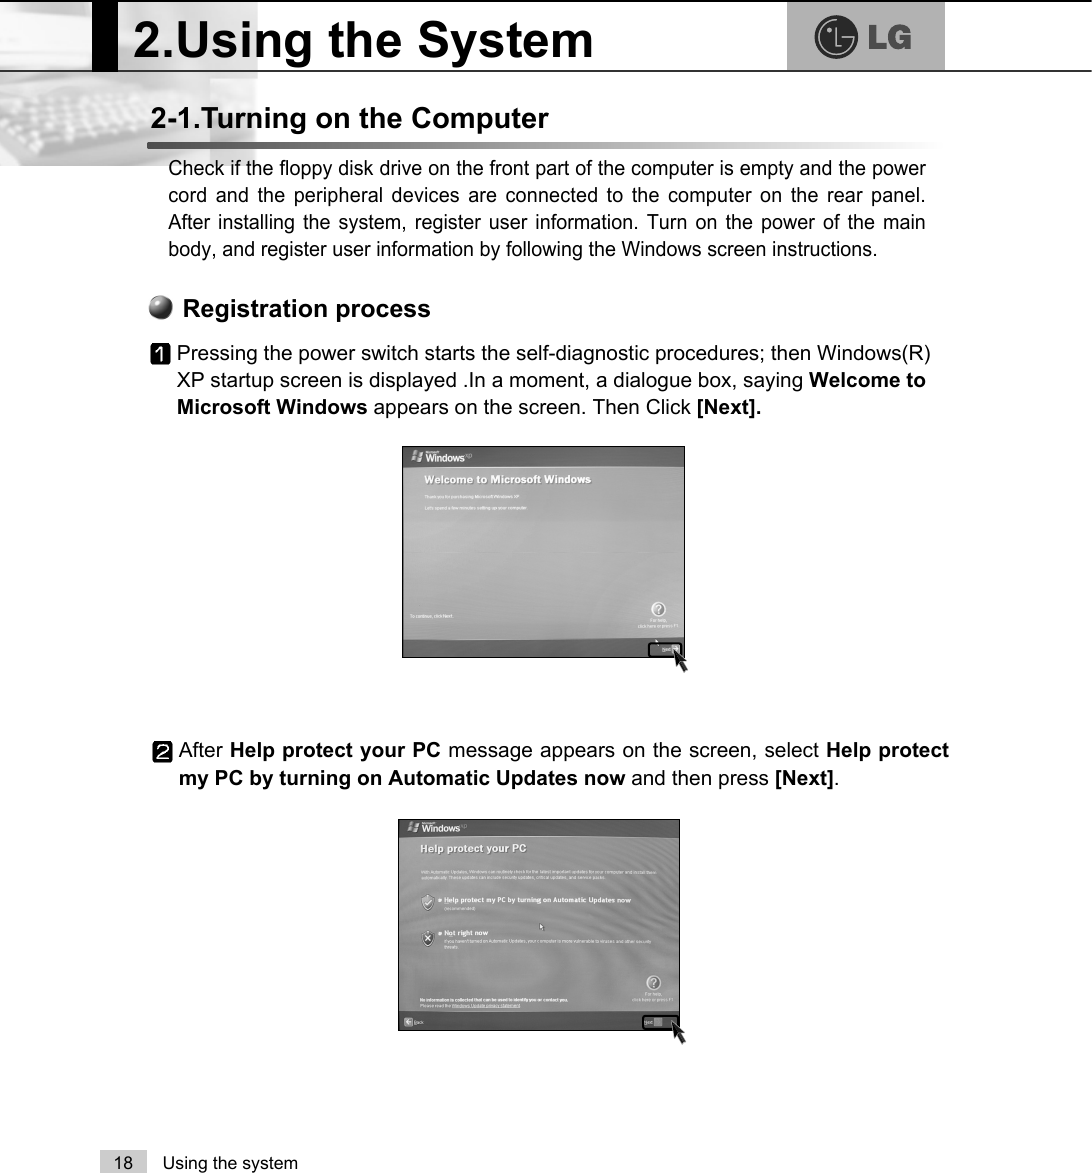 2.Using the System18 Using the systemCheck if the floppy disk drive on the front part of the computer is empty and the powercord and the peripheral devices are connected to the computer on the rear panel.After installing the system, register user information. Turn on the power of the mainbody, and register user information by following the Windows screen instructions.2-1.Turning on the ComputerPressing the power switch starts the self-diagnostic procedures; then Windows(R)XP startup screen is displayed .In a moment, a dialogue box, saying Welcome toMicrosoft Windows appears on the screen. Then Click [Next].Registration processAfter Help protect your PC message appears on the screen, select Help protectmy PC by turning on Automatic Updates now and then press [Next]. 